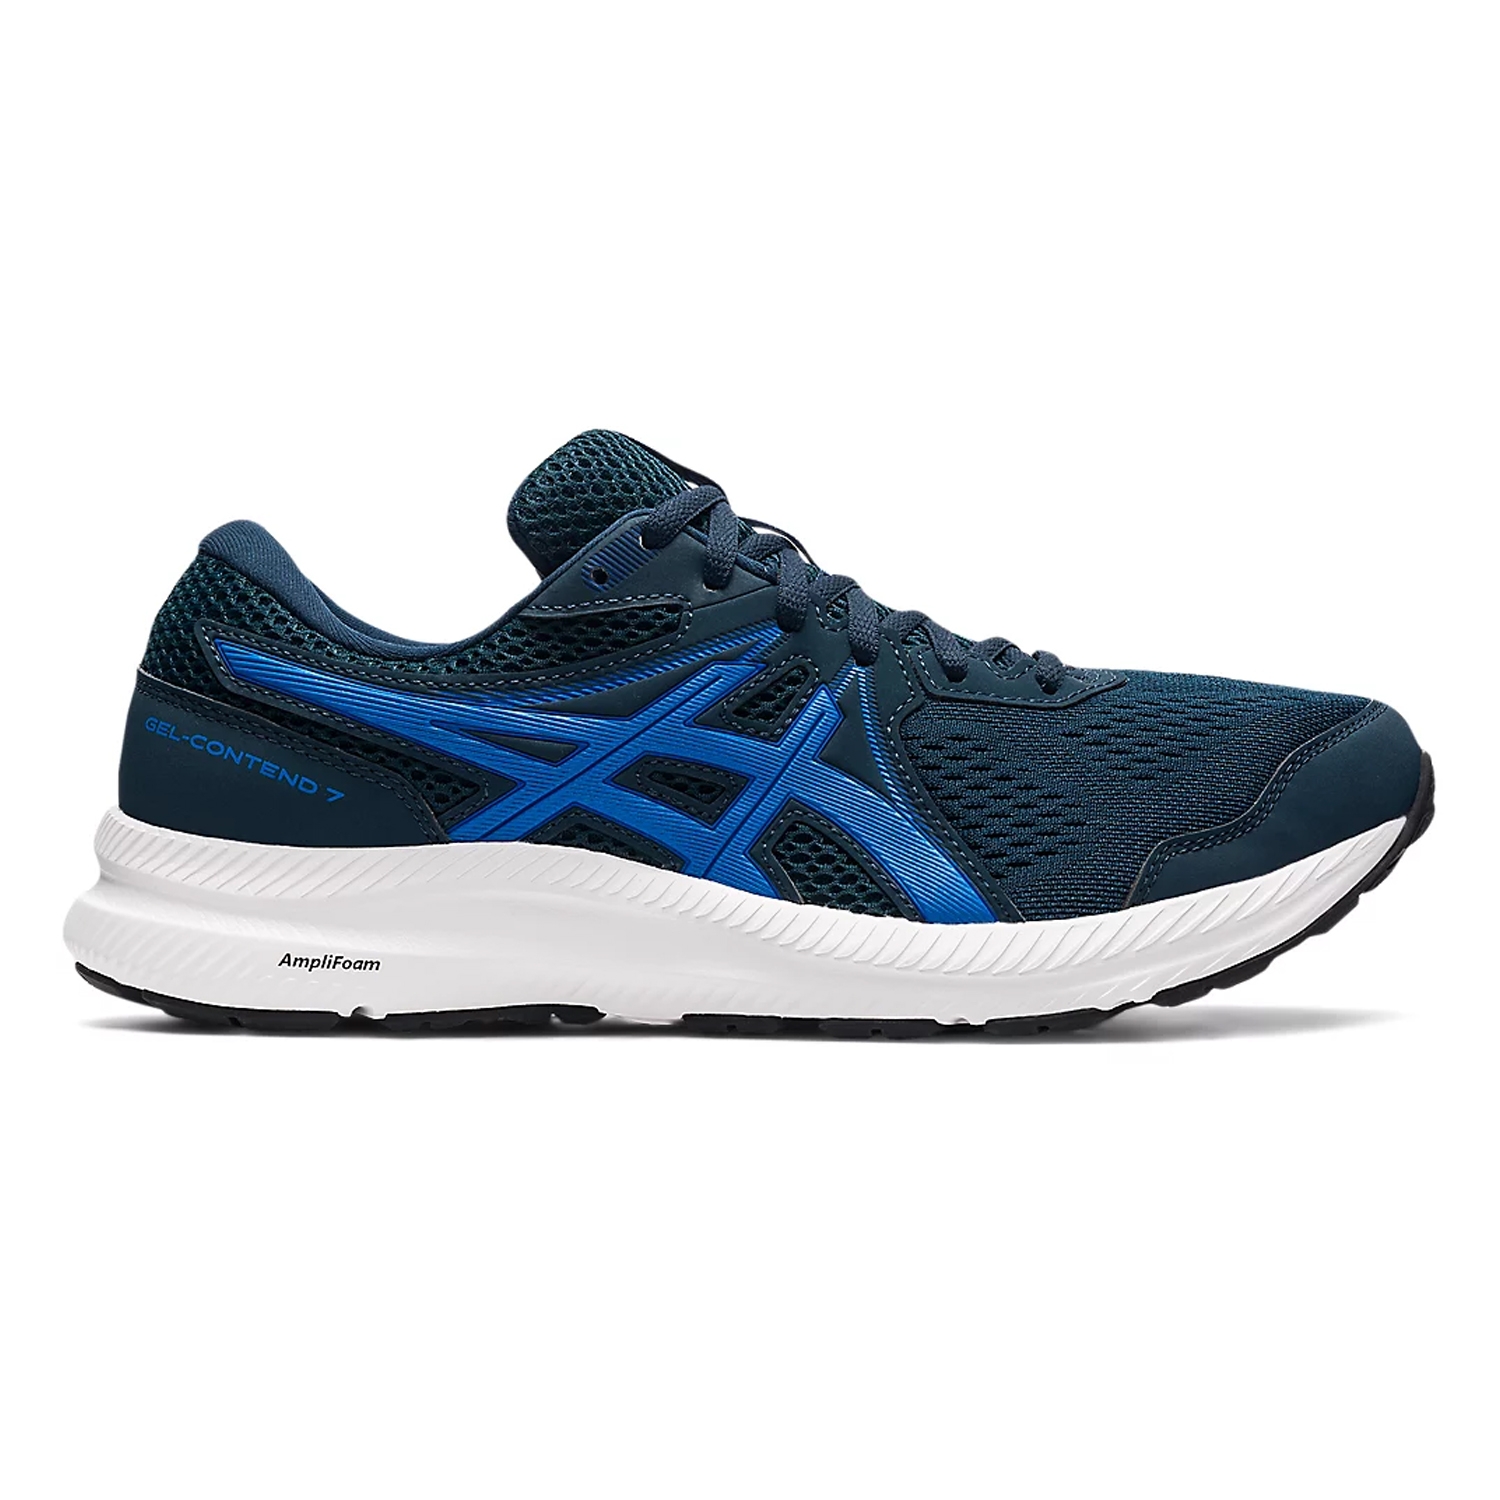 Asics Gel-Contend 7 Mens Running Shoes: French Blue/Electric Blue ...